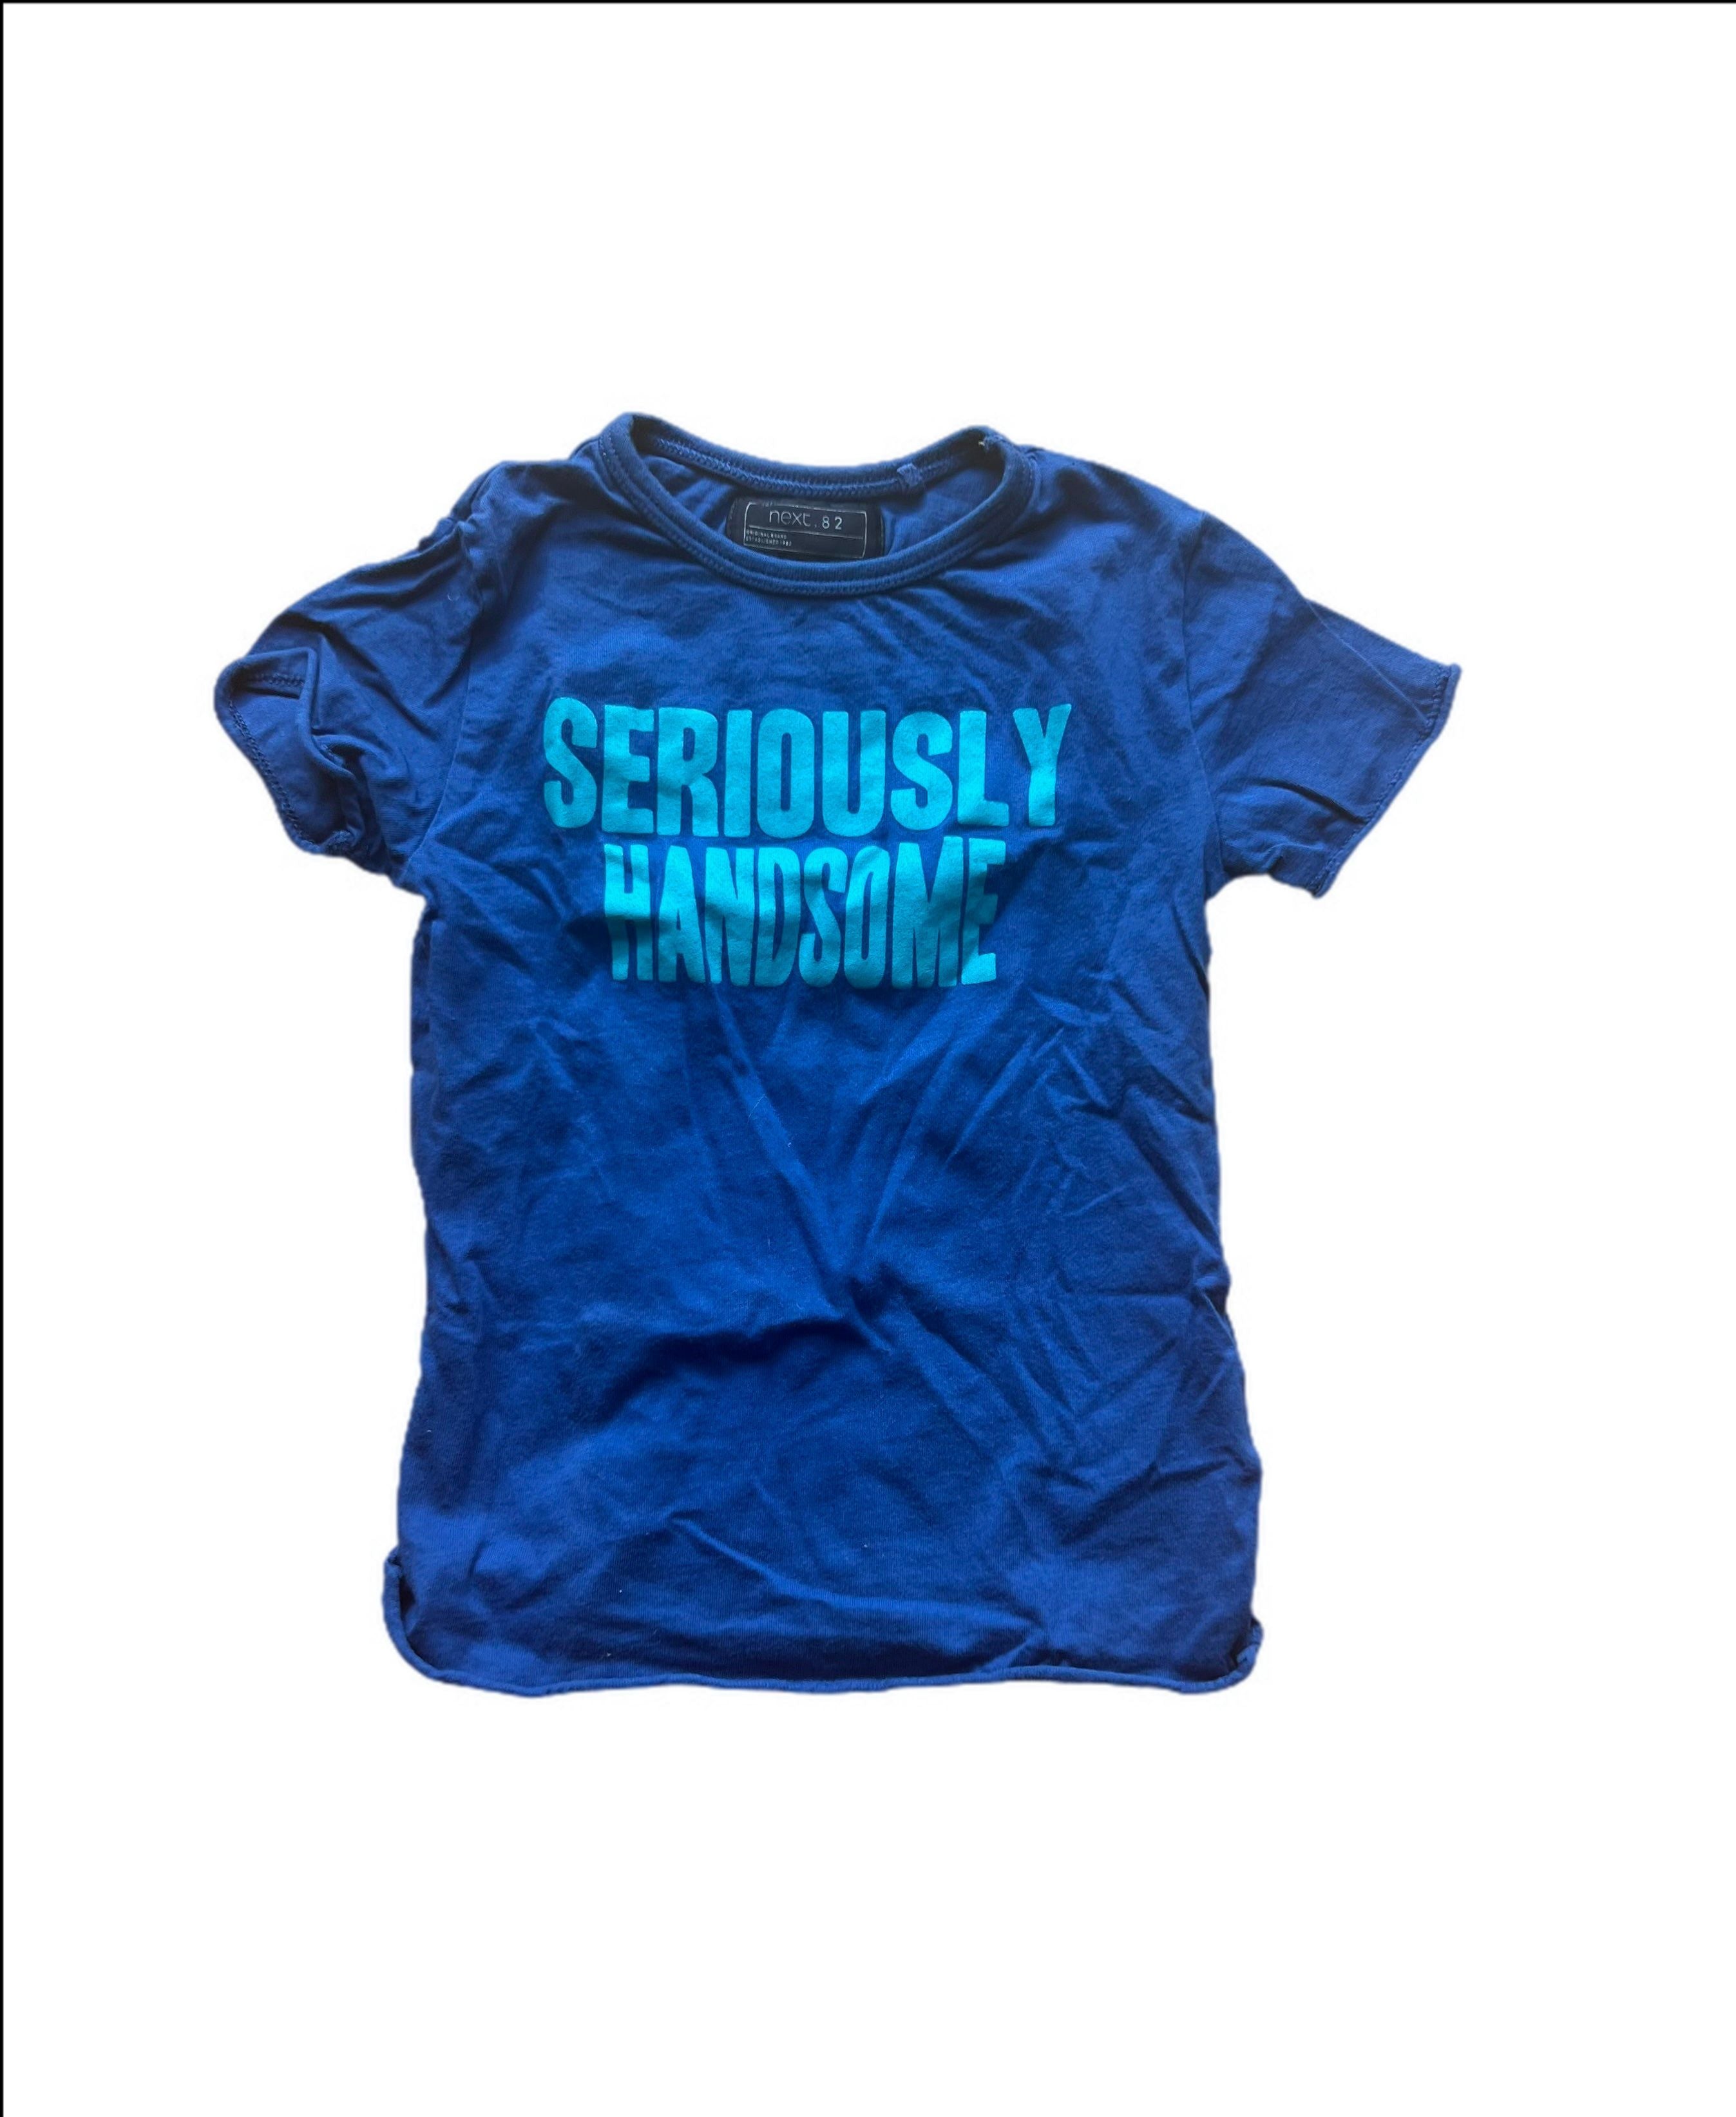 Short sleeve top that says seriously handsome